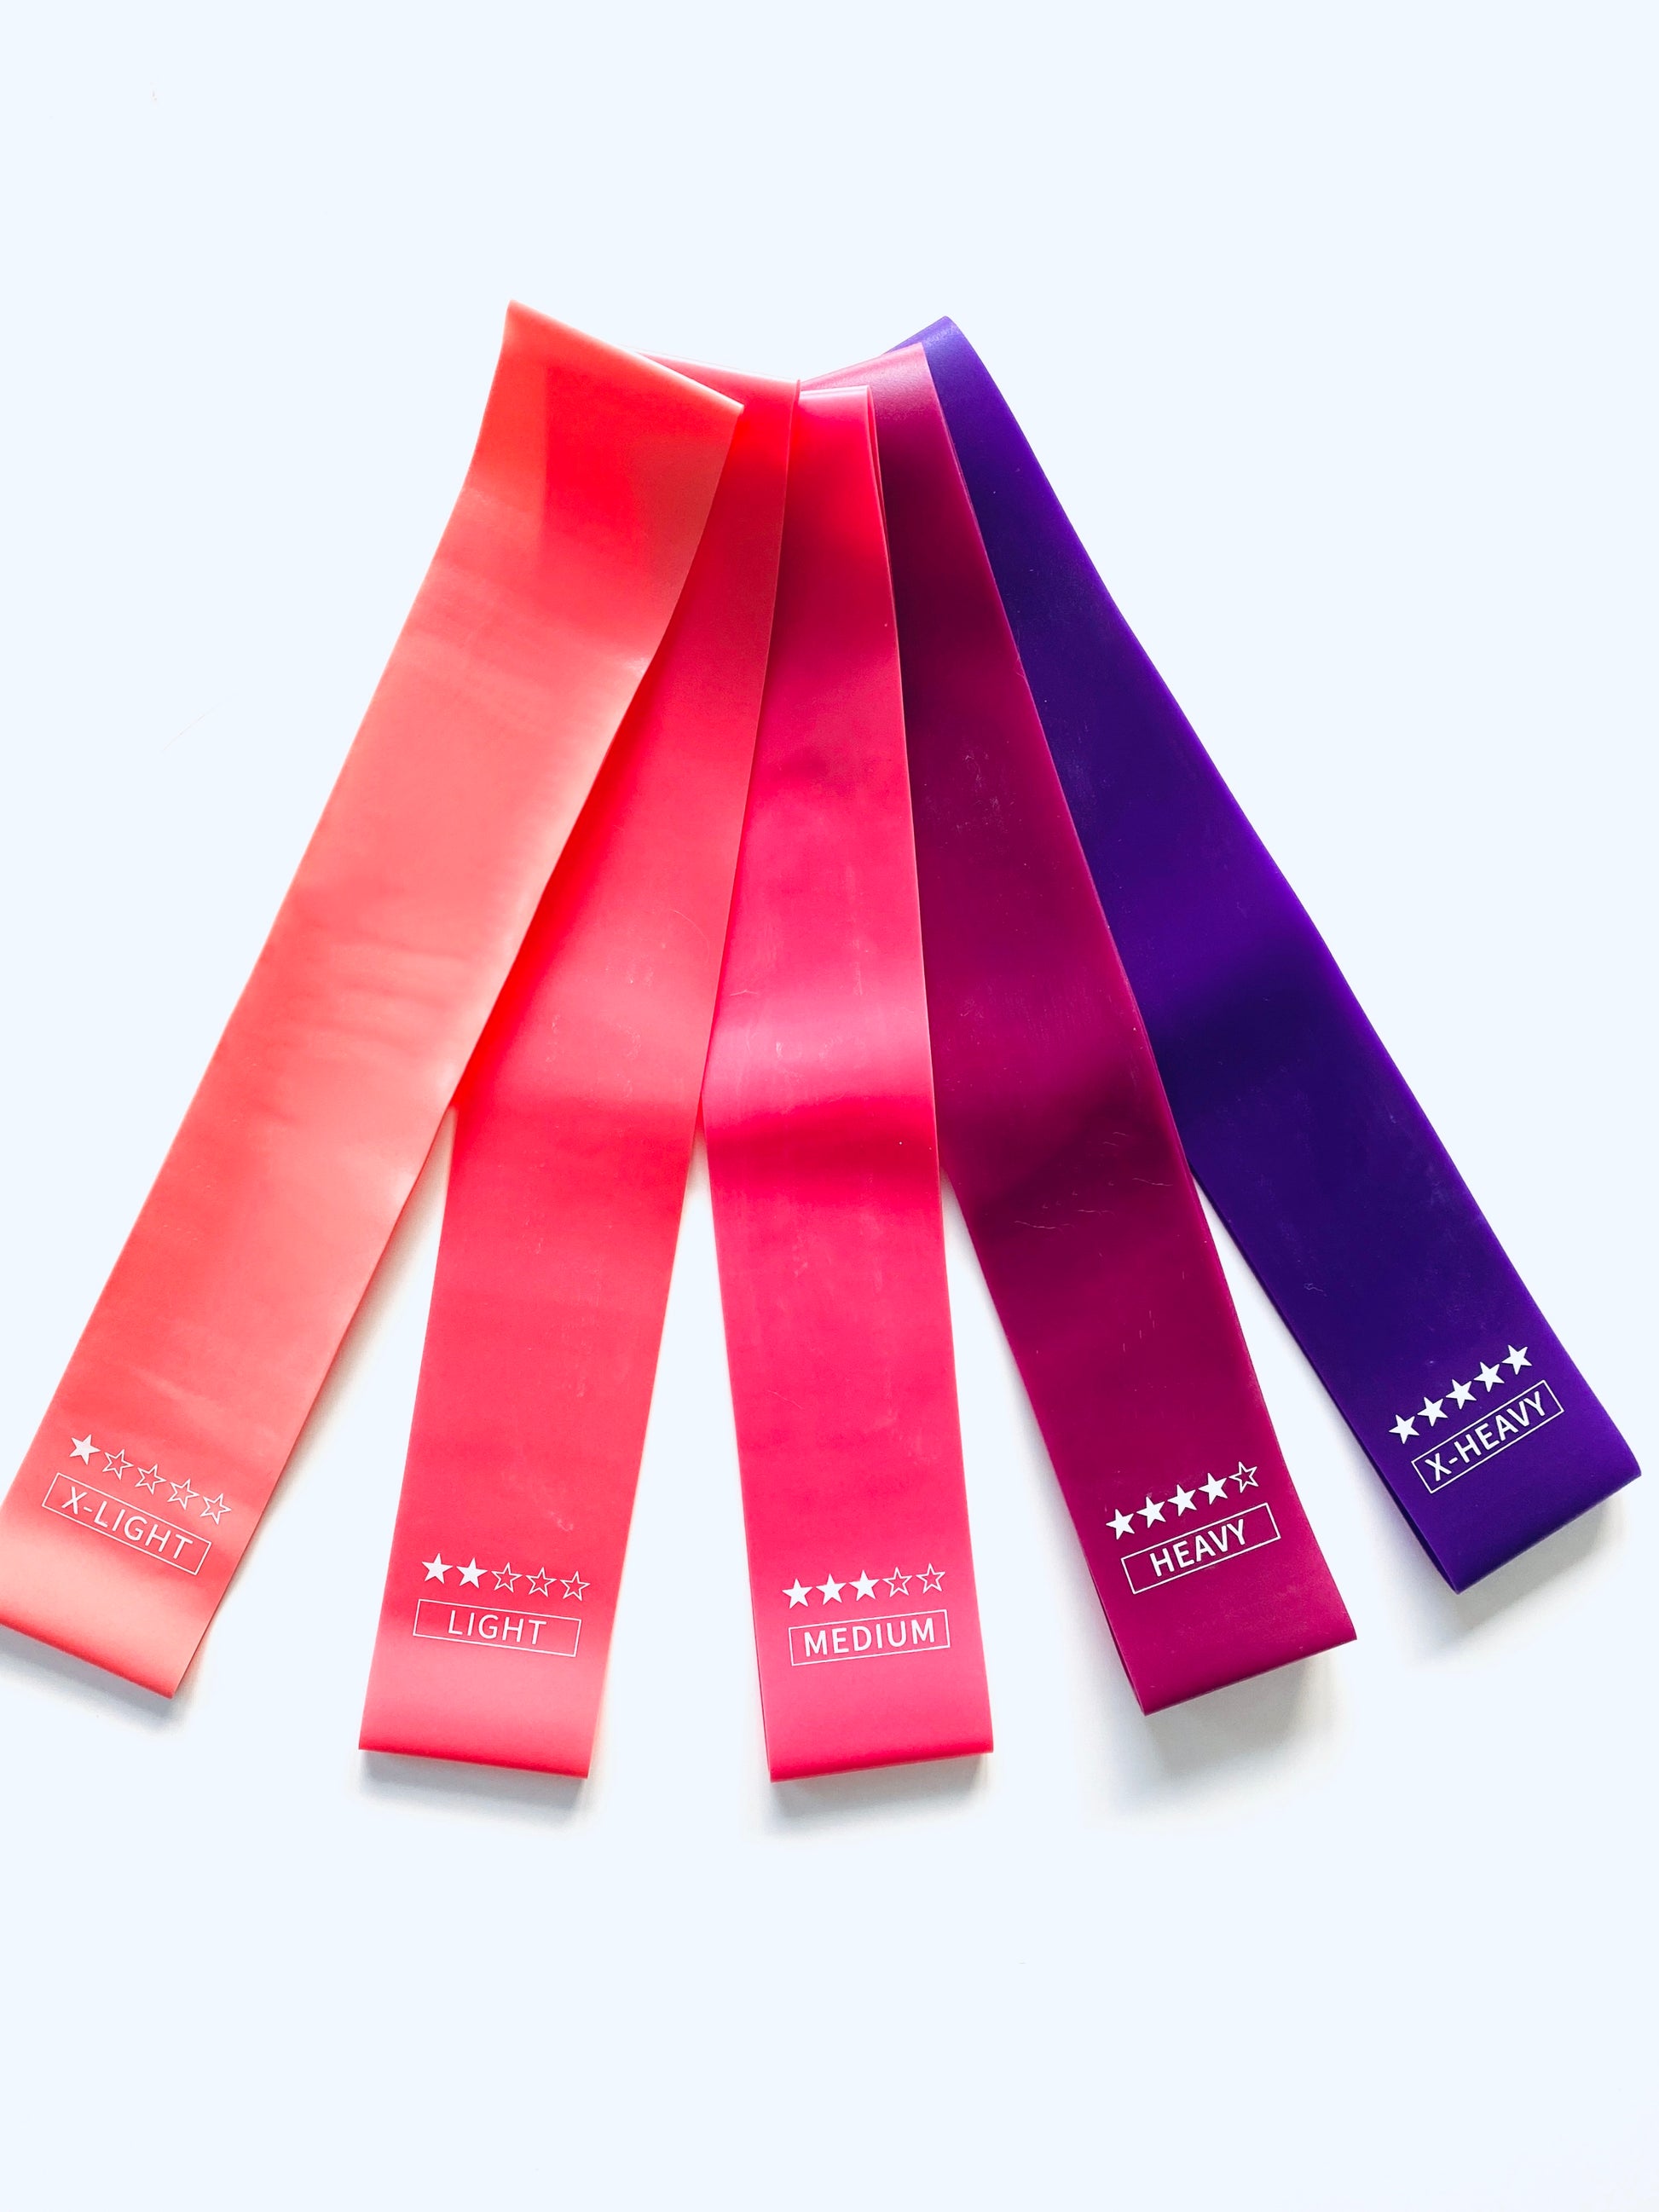 pack of 5 strengthening resistance bands in pinks and purples from The Collective Dancewear